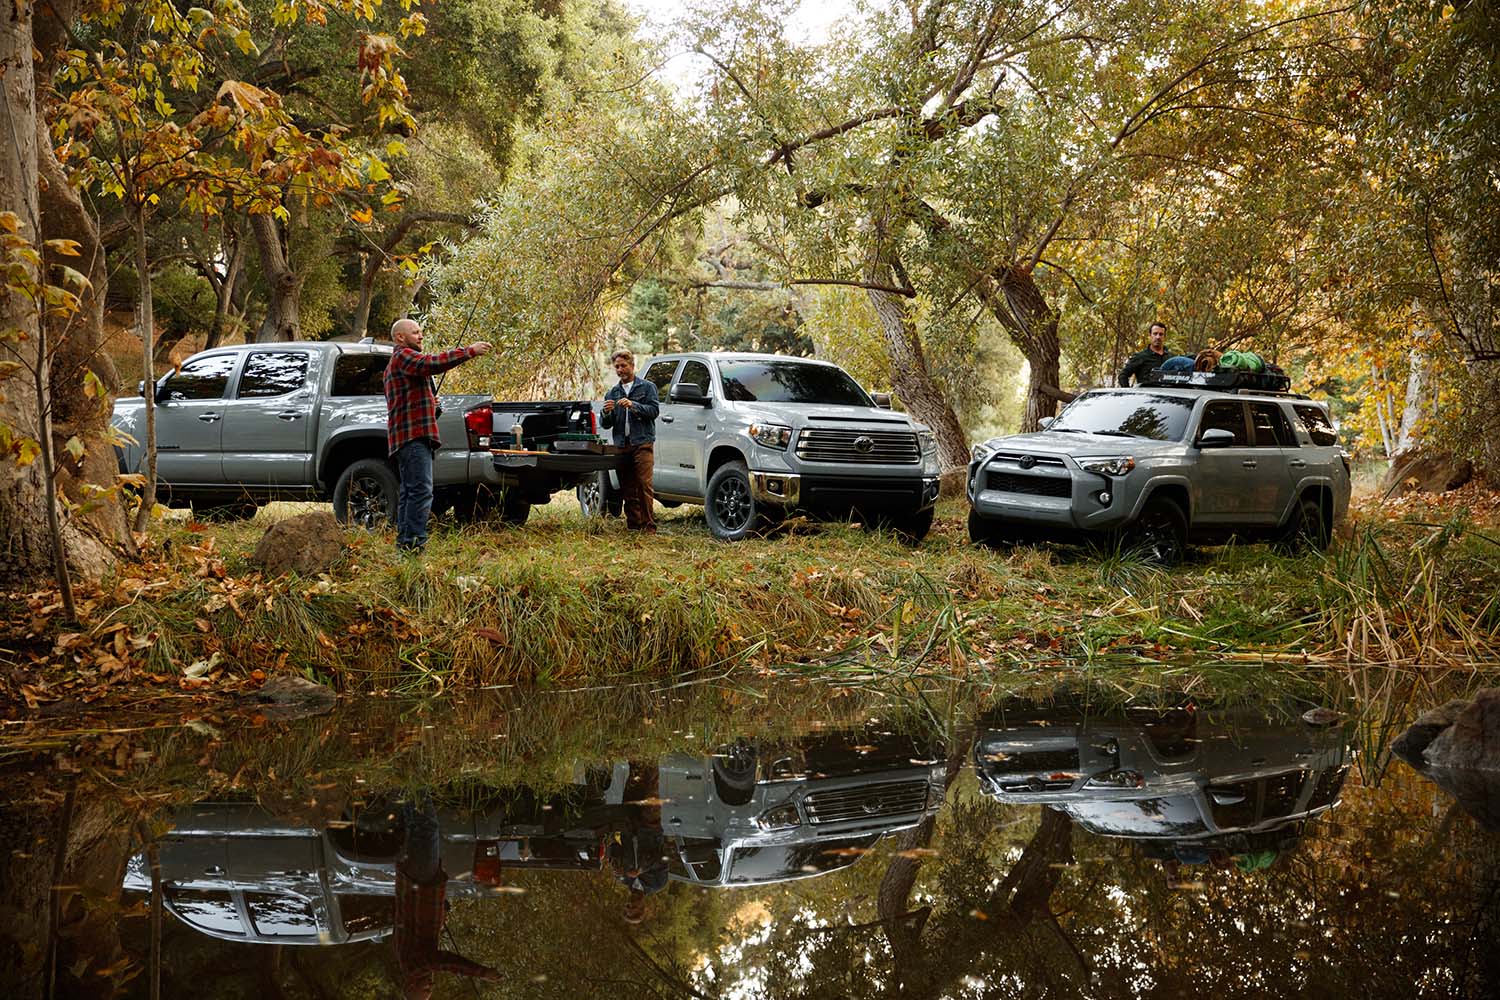 Accessories that help keep your Toyota protected at Bennett Toyota in Allentown, PA | 2021 Toyota Tundra, Tacoma, and 4Runner parked in the woods